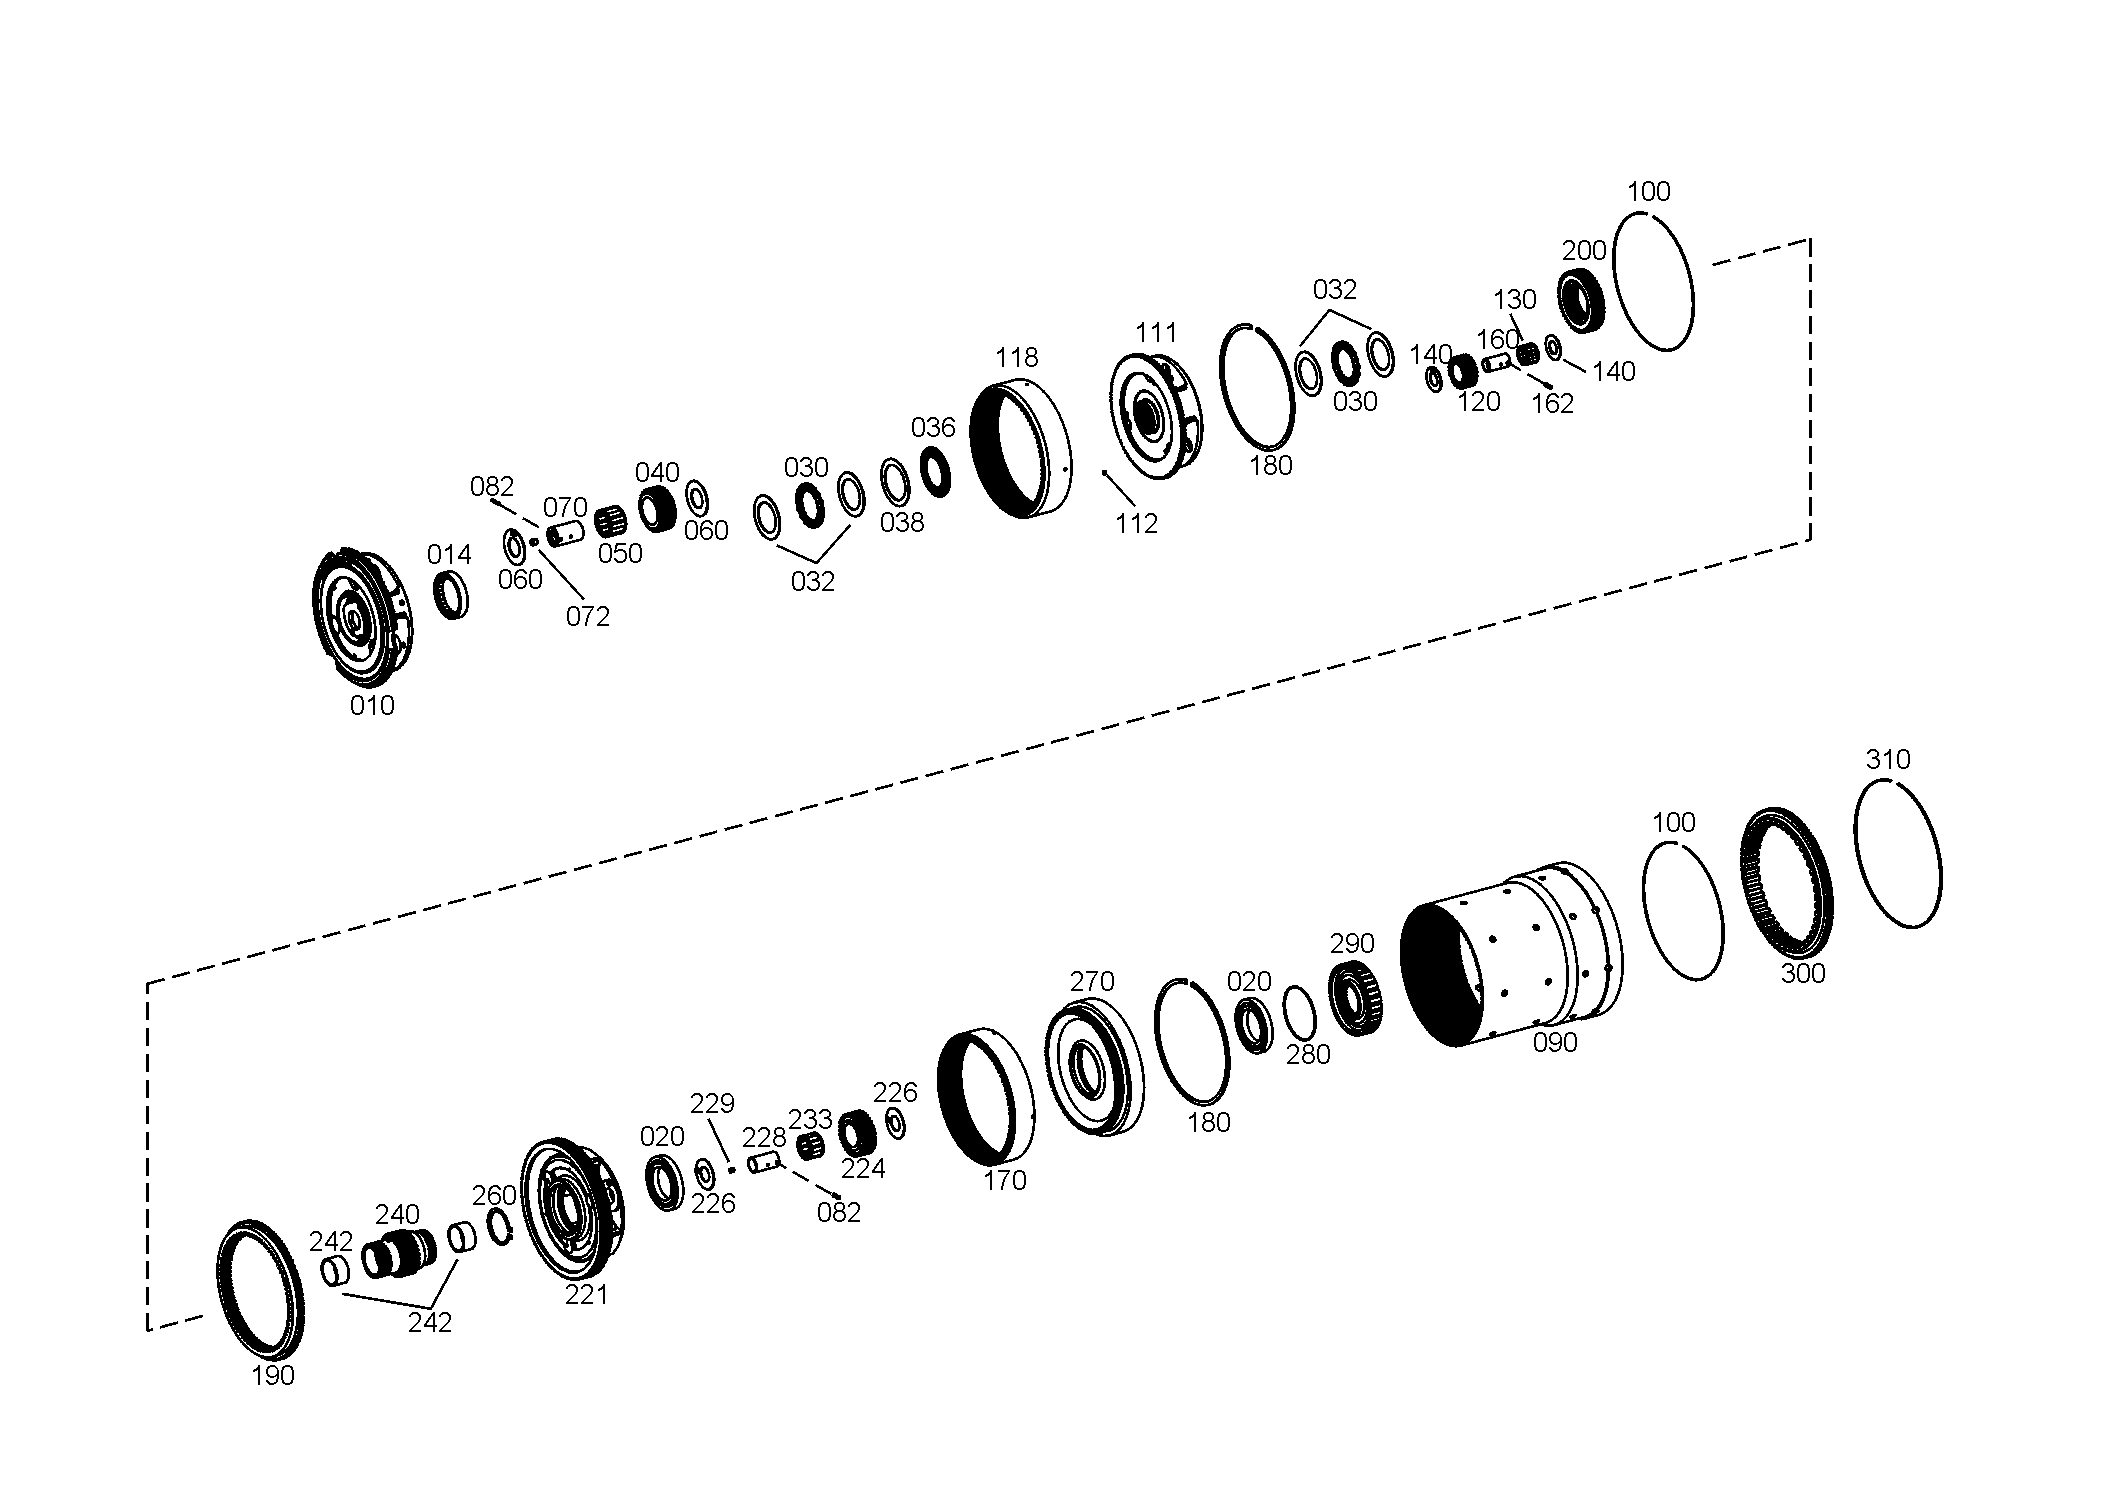 drawing for PPM 09397960 - BALL BEARING (figure 3)